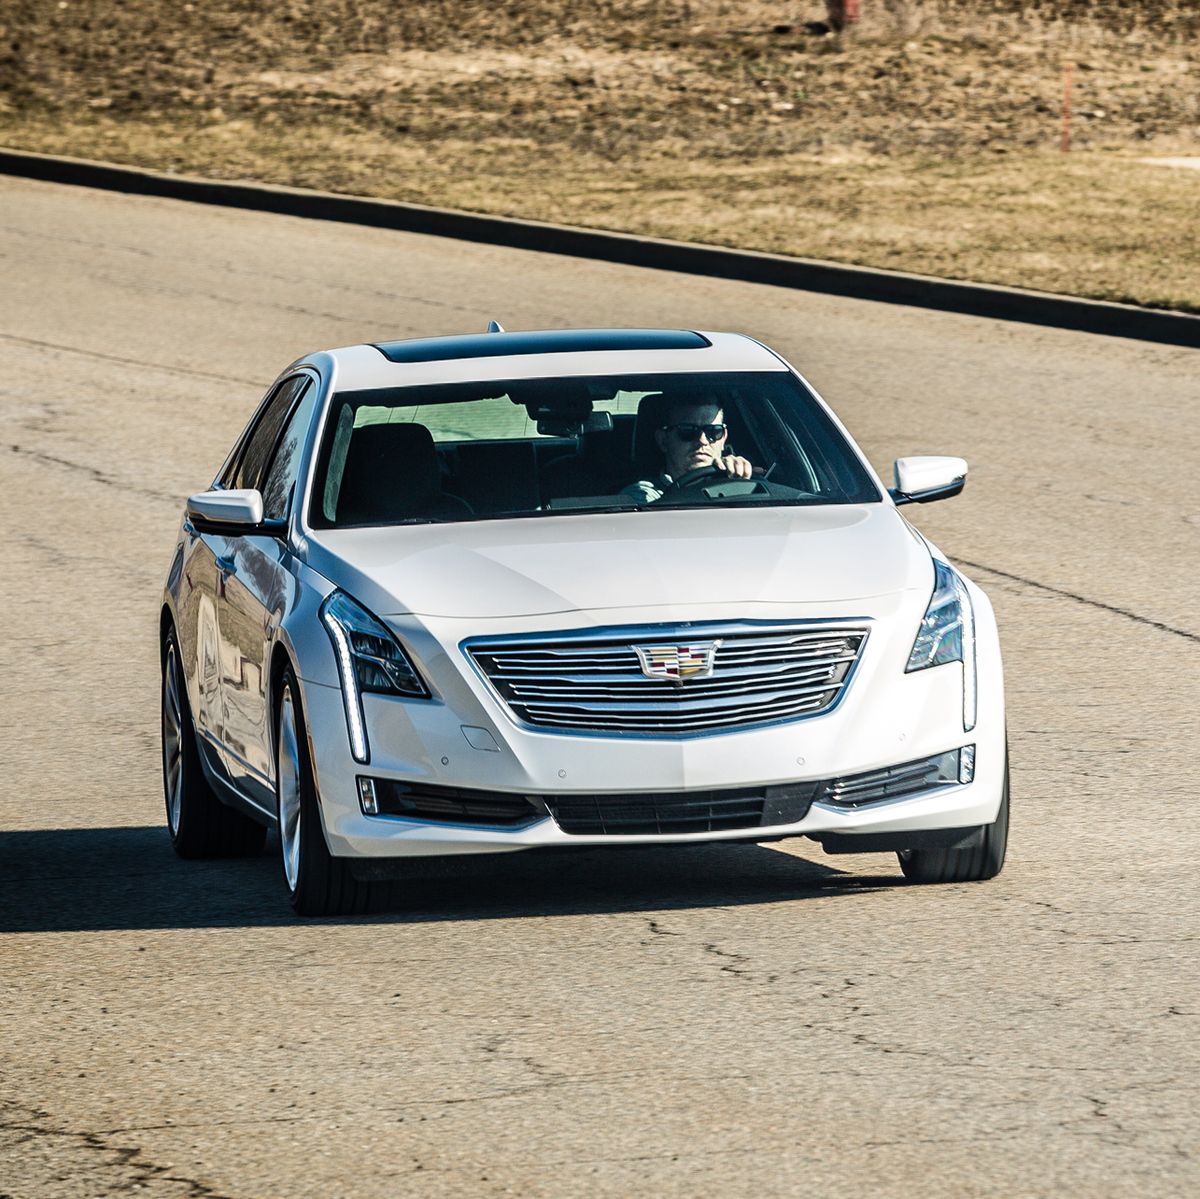 Tested: 2017 Cadillac CT6 is a Polished Performer